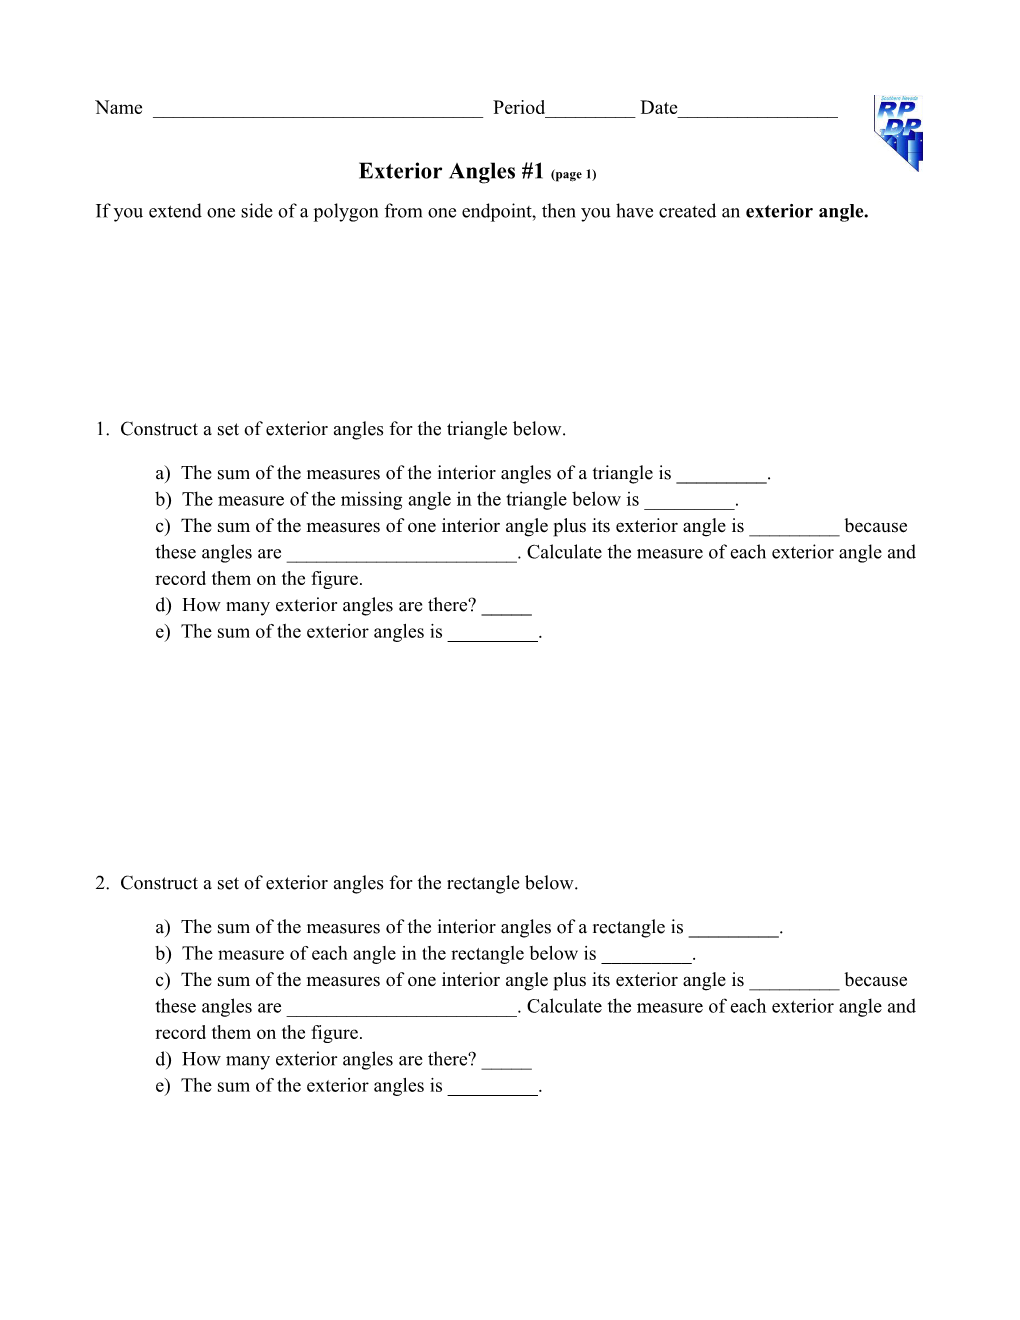 Exterior Angles #1(Page 1)